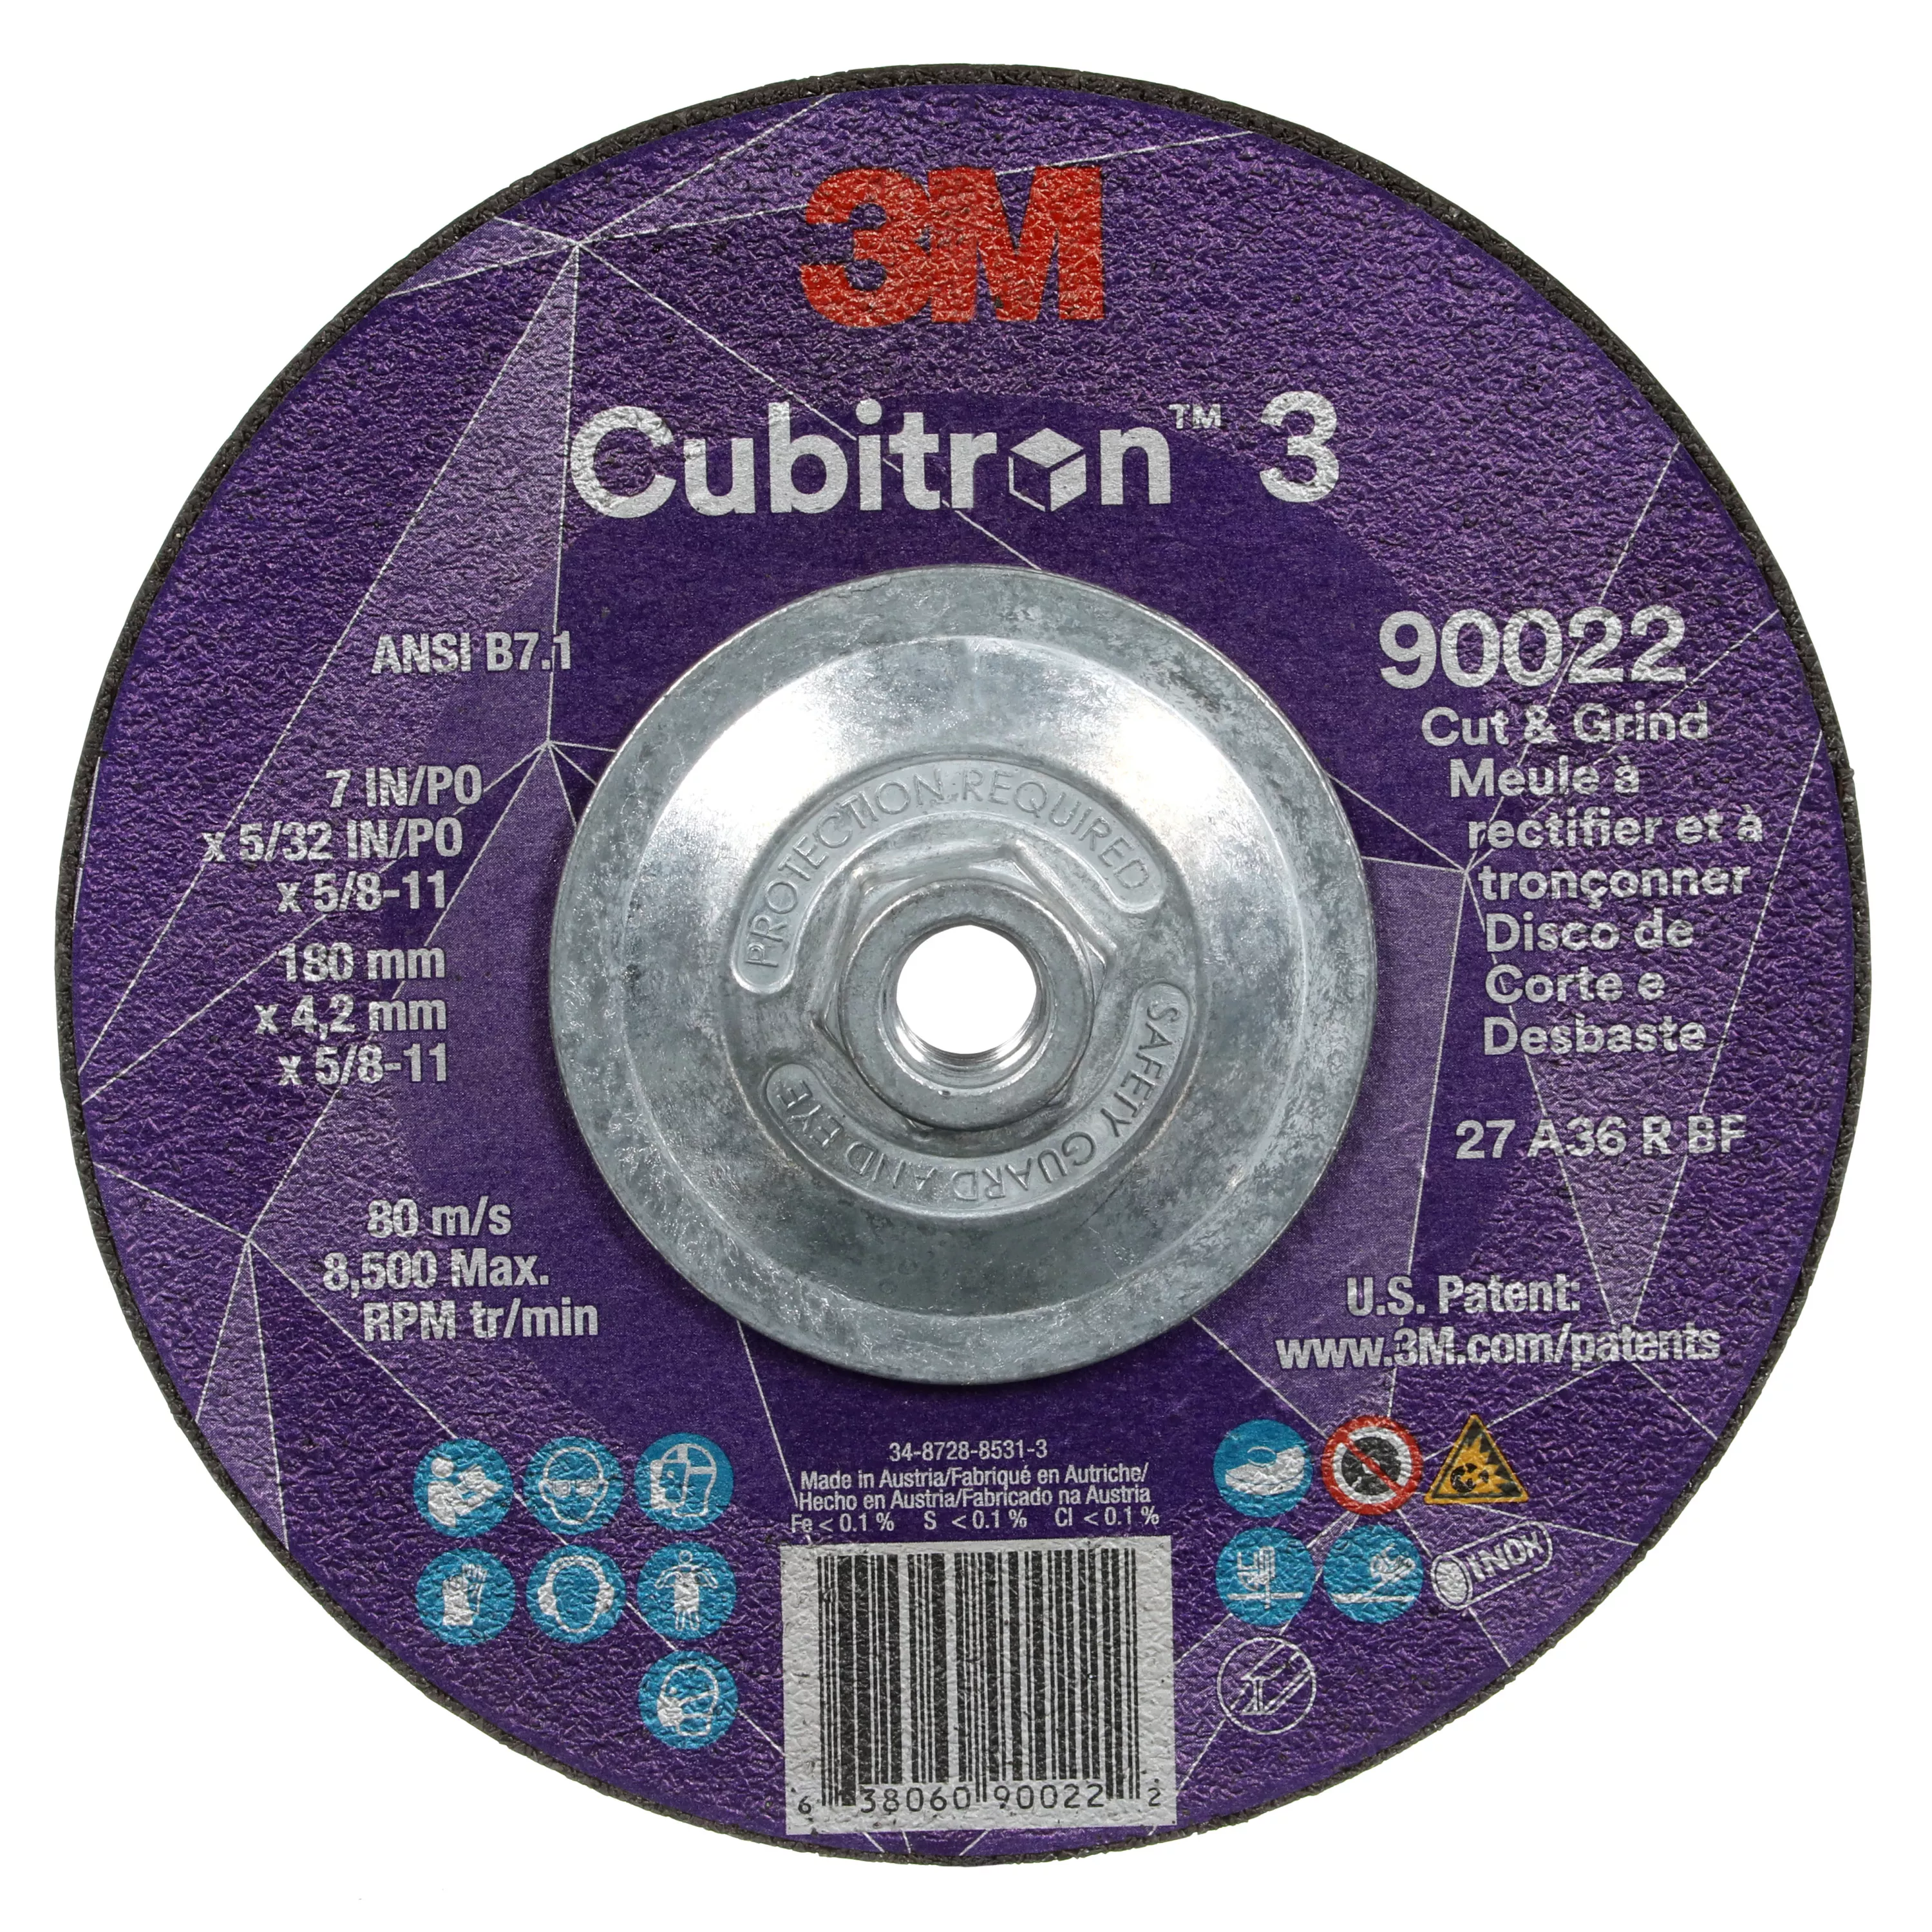 3M™ Cubitron™ 3 Cut and Grind Wheel, 90022, 36+, T27, 7 in x 5/32 in x
5/8 in-11 (180 x 4.2 mm x 5/8-11 in), ANSI, 10 ea/Case